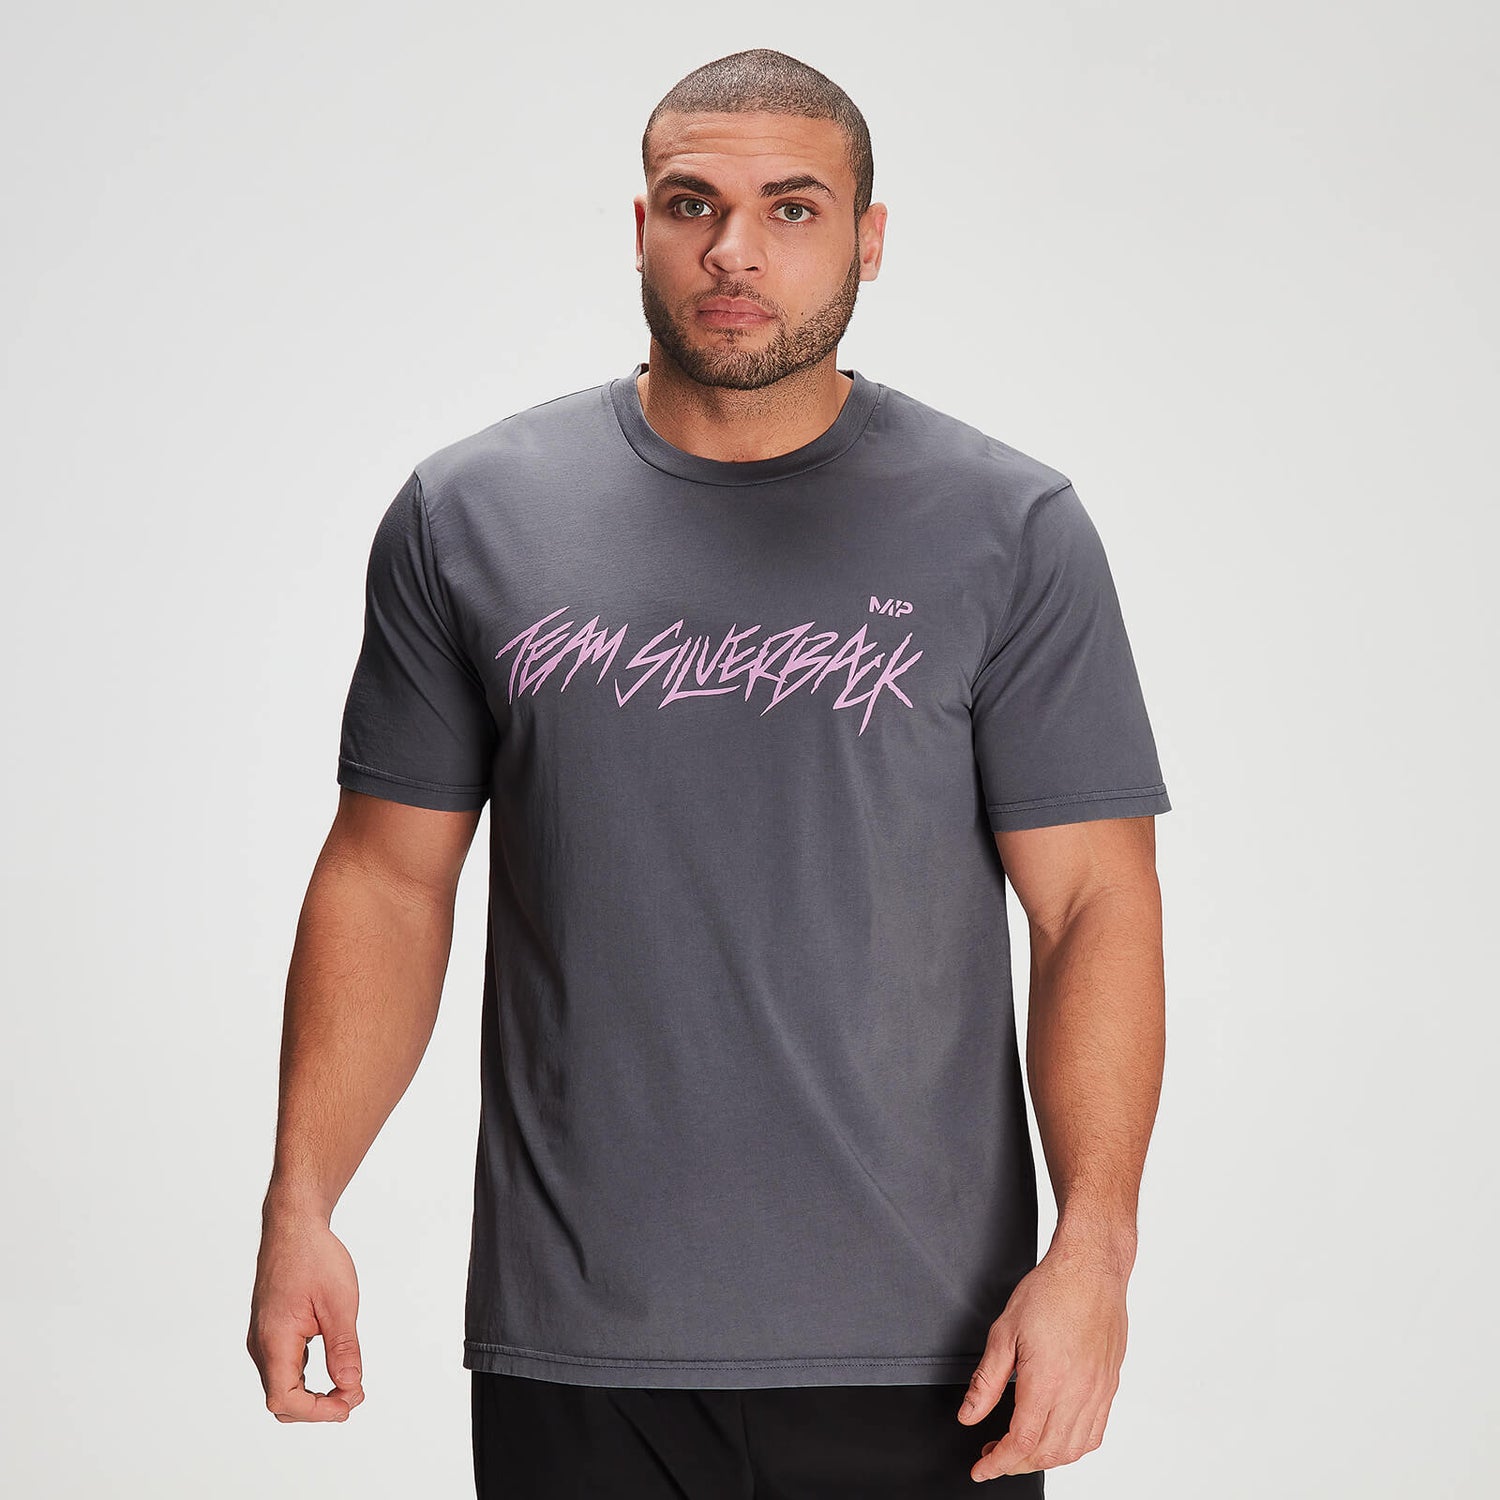 MP X Zack George Men's Washed T-Shirt - Carbon